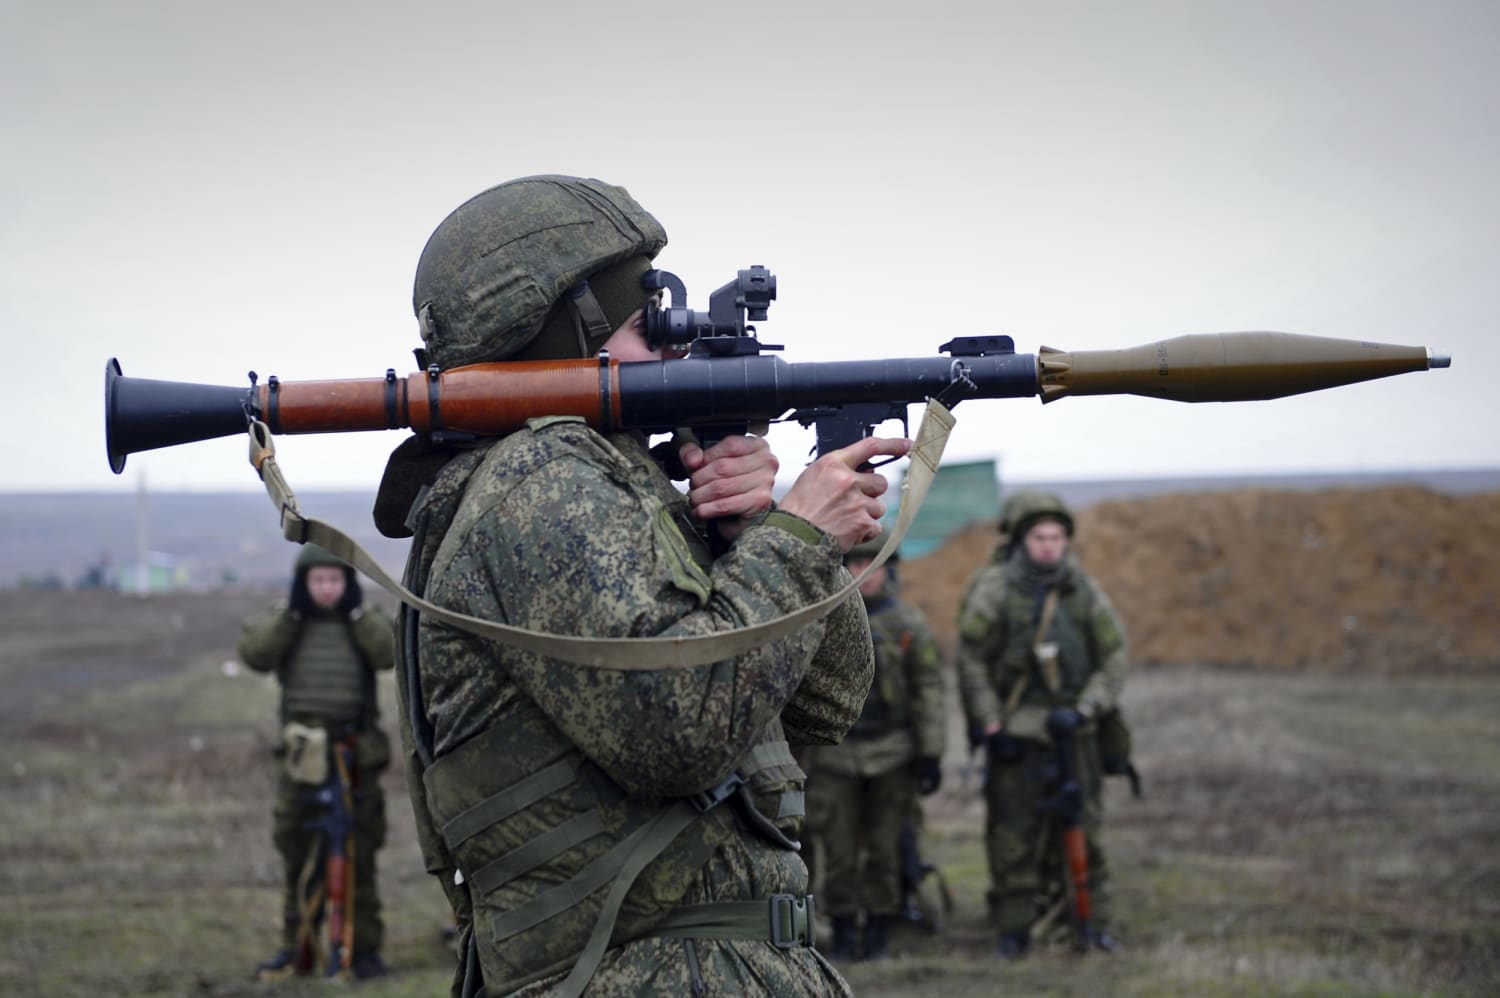 Russian might invade Ukraine again. This time, the fallout wouldn’t be contained.